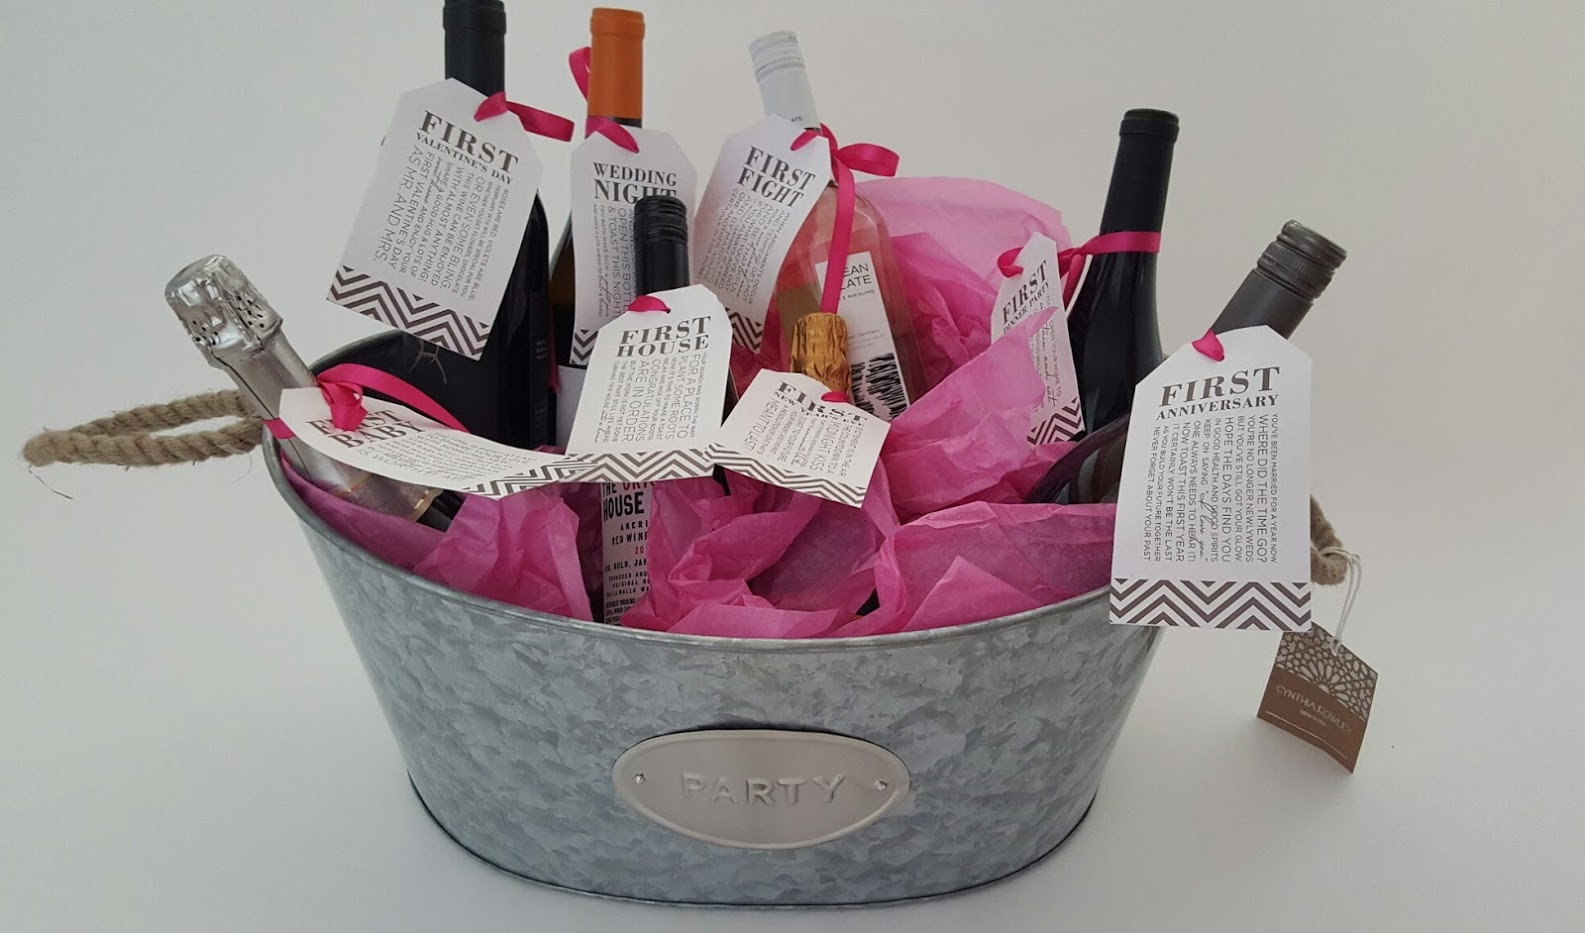 Wedding Gift Basket Ideas For Bride And Groom
 Bridal Shower Gift DIY to Try A Basket of “Firsts” for